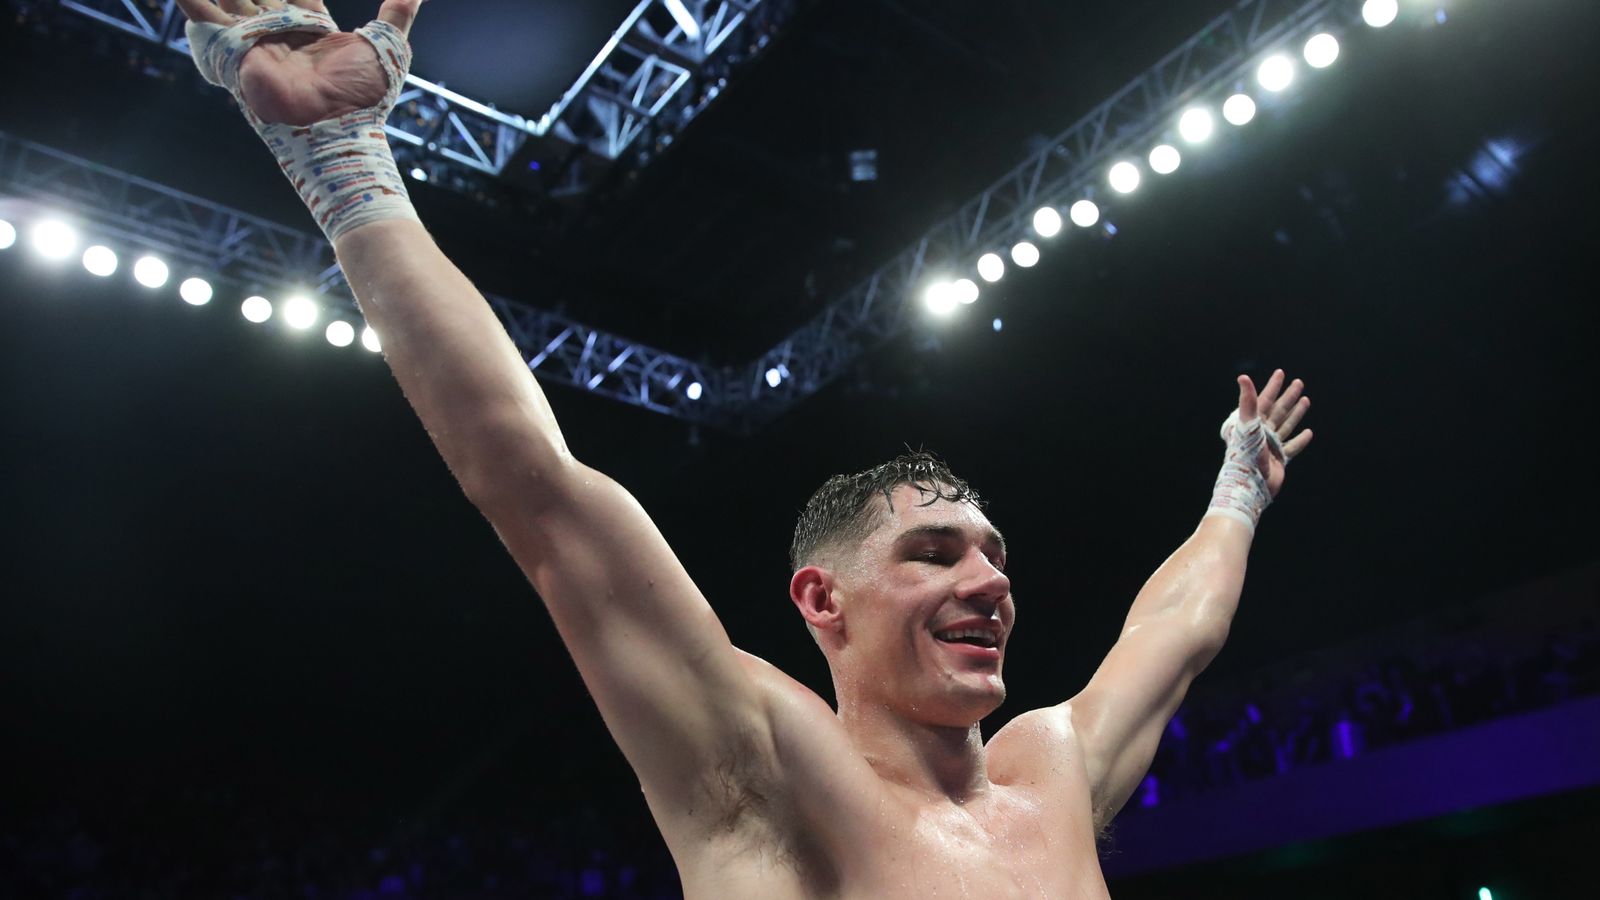 Chris Billam-Smith calls for Jai Opetaia world title fight next: ‘Come over to England, let’s get it done at the football stadium!’